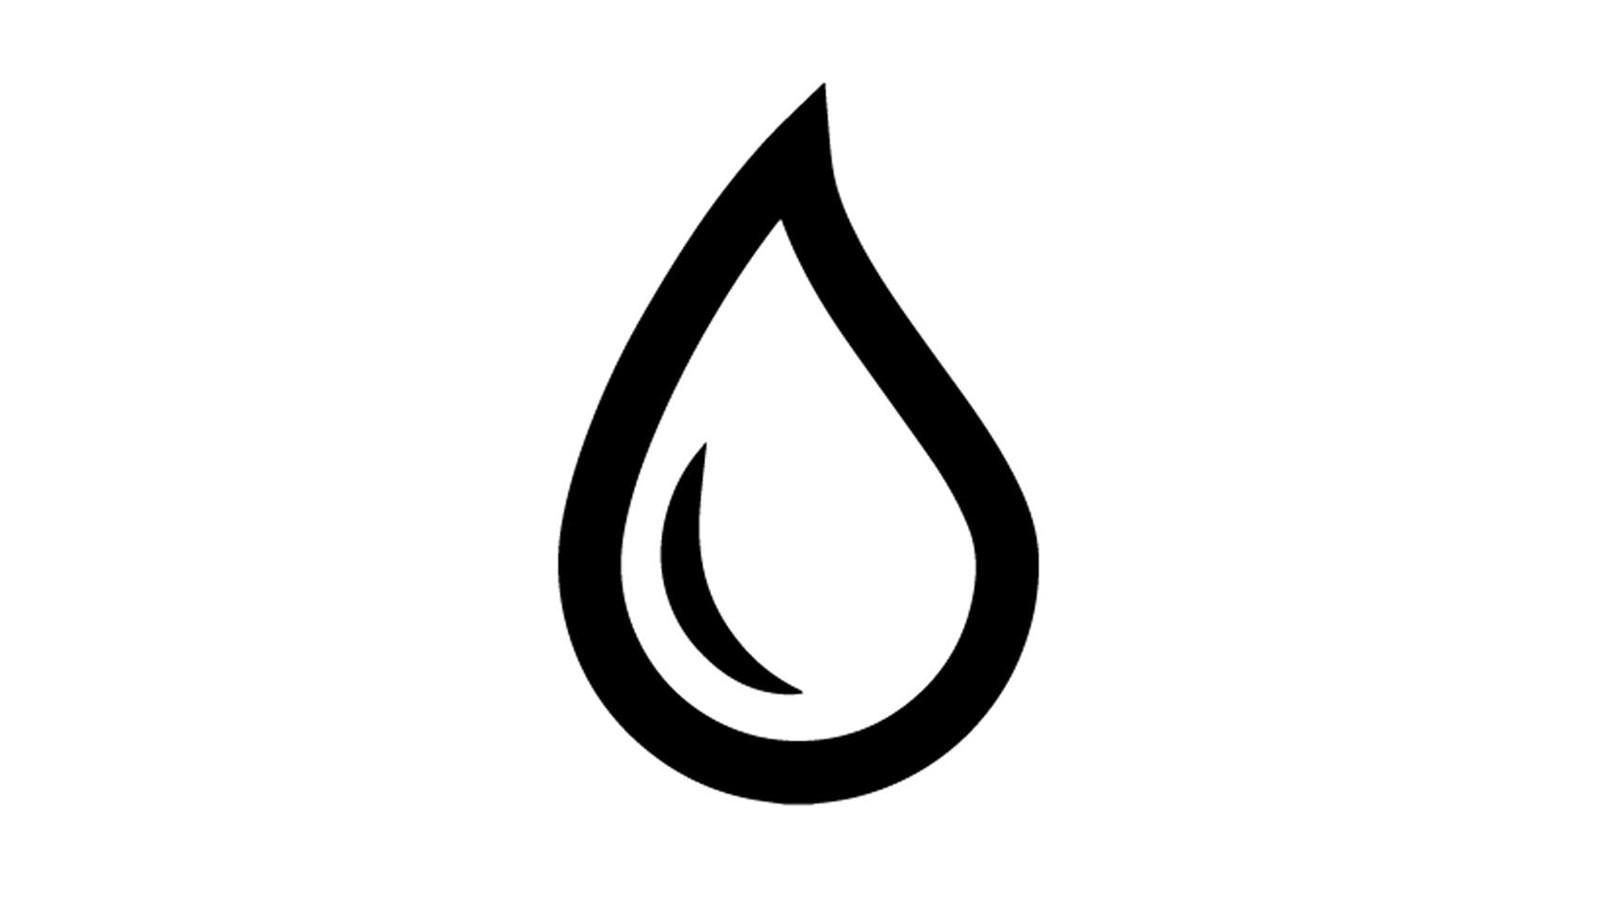 icon of water droplet